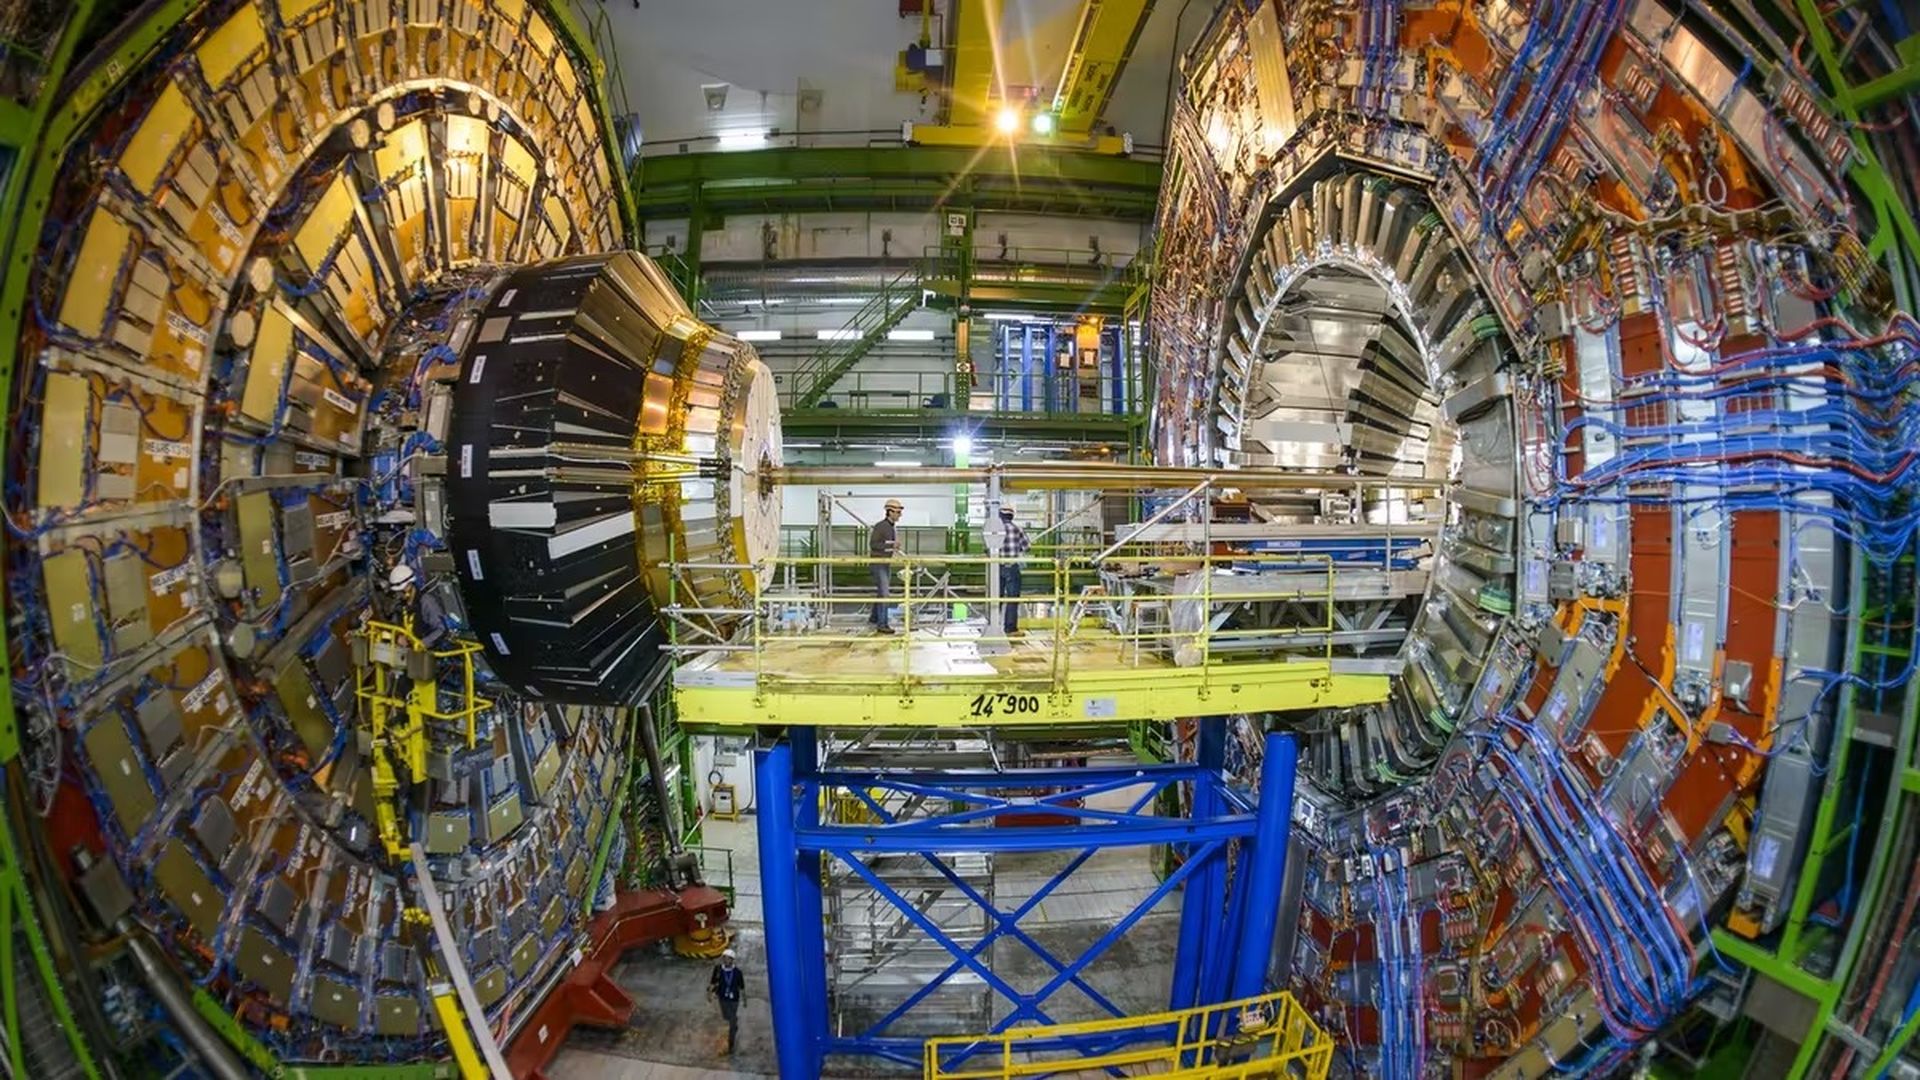 A lot of people have been asking what time is CERN being turned on. The Large Hadron Collider (LHC) experiment will resume data collection after three years of being shut down for maintenance and upgrading work.